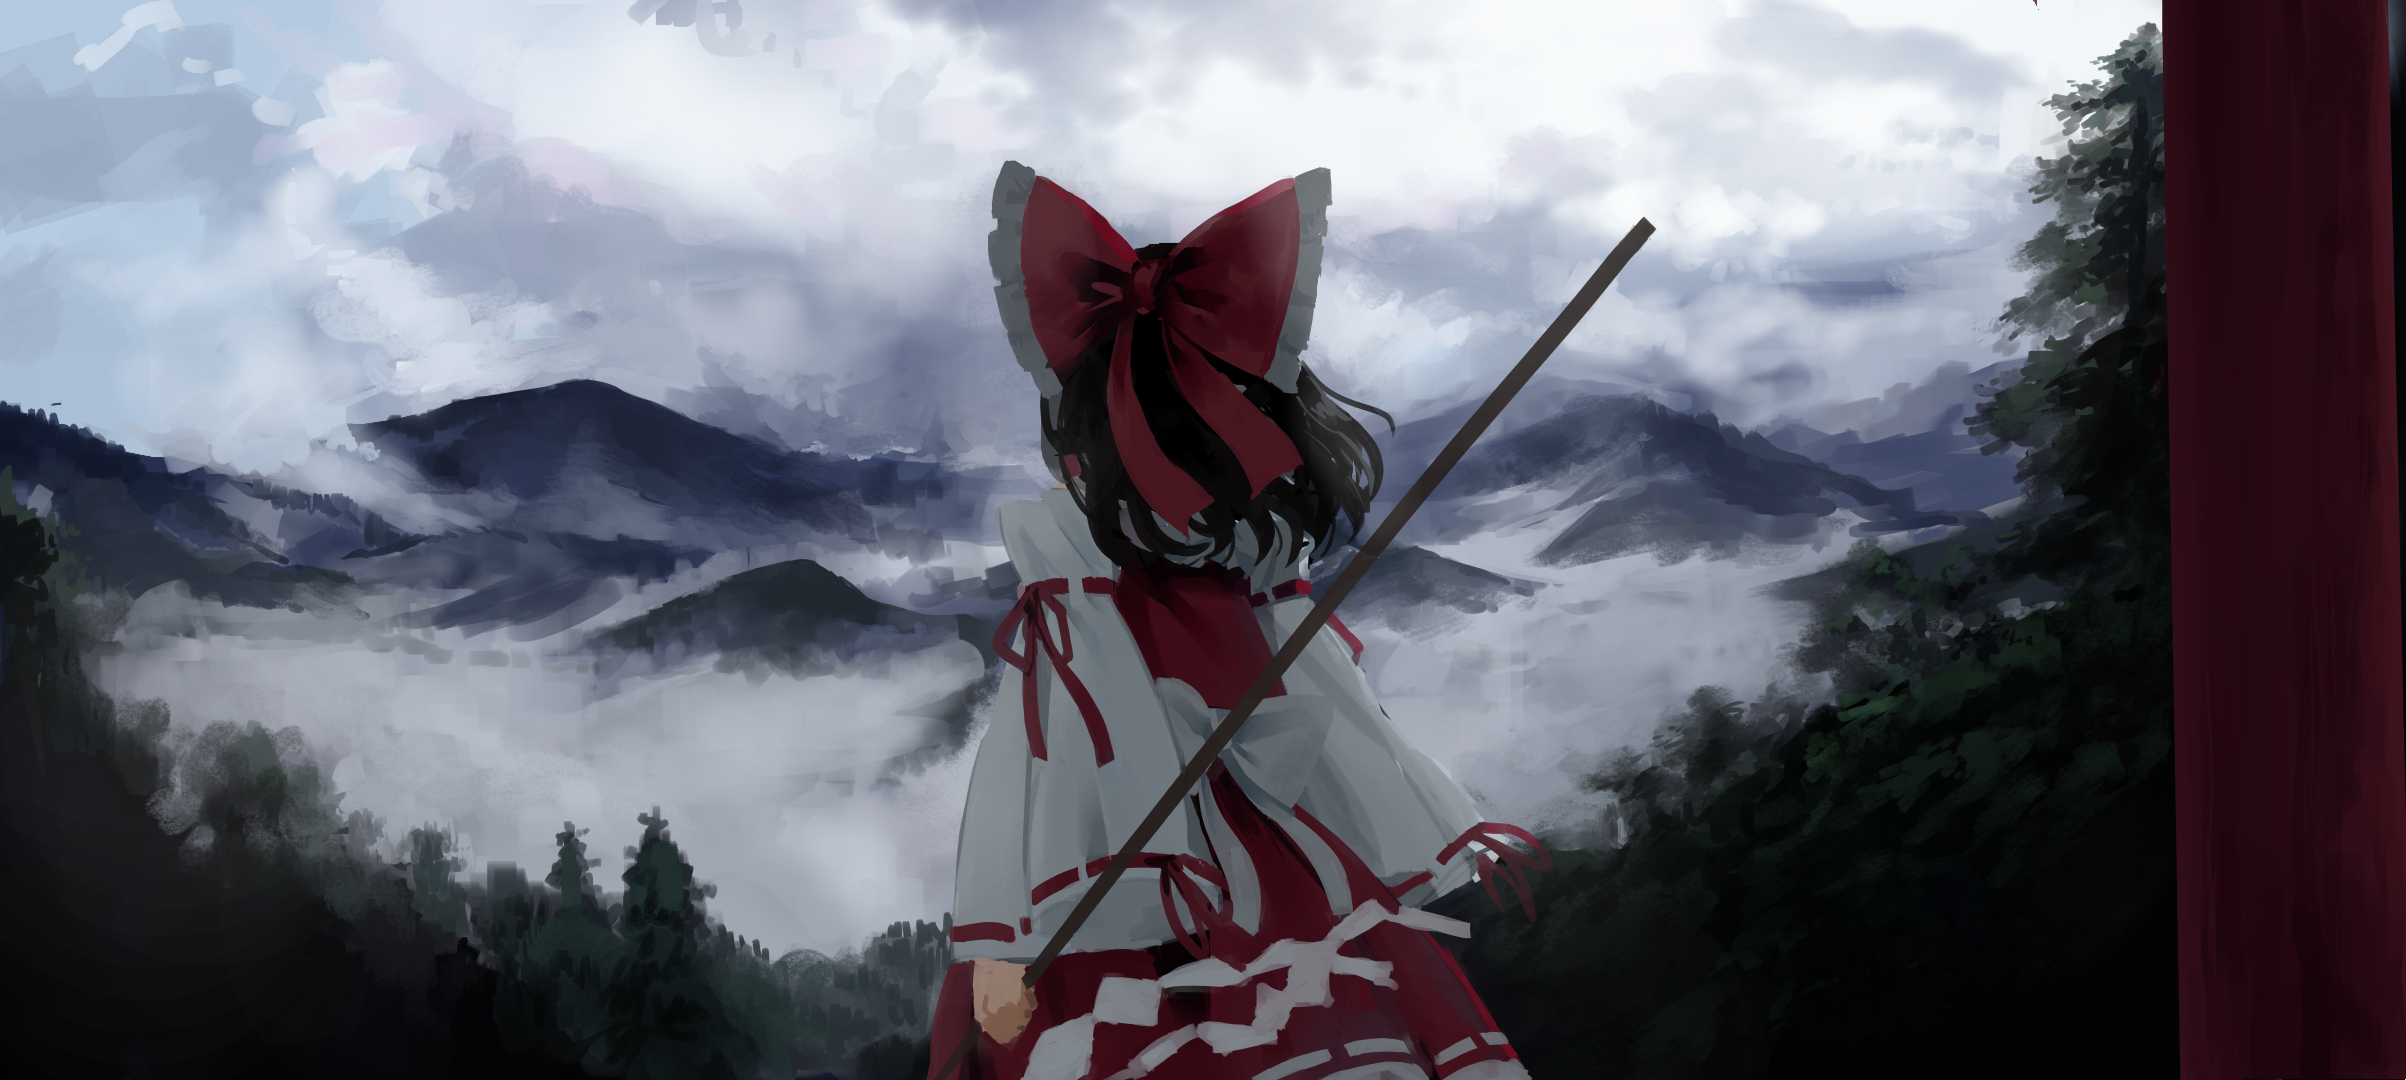 Anime 2406x1080 Hakurei Reimu Touhou anime girls mountains red bow miko overcast forest looking into the distance looking away anime artwork digital art 2D